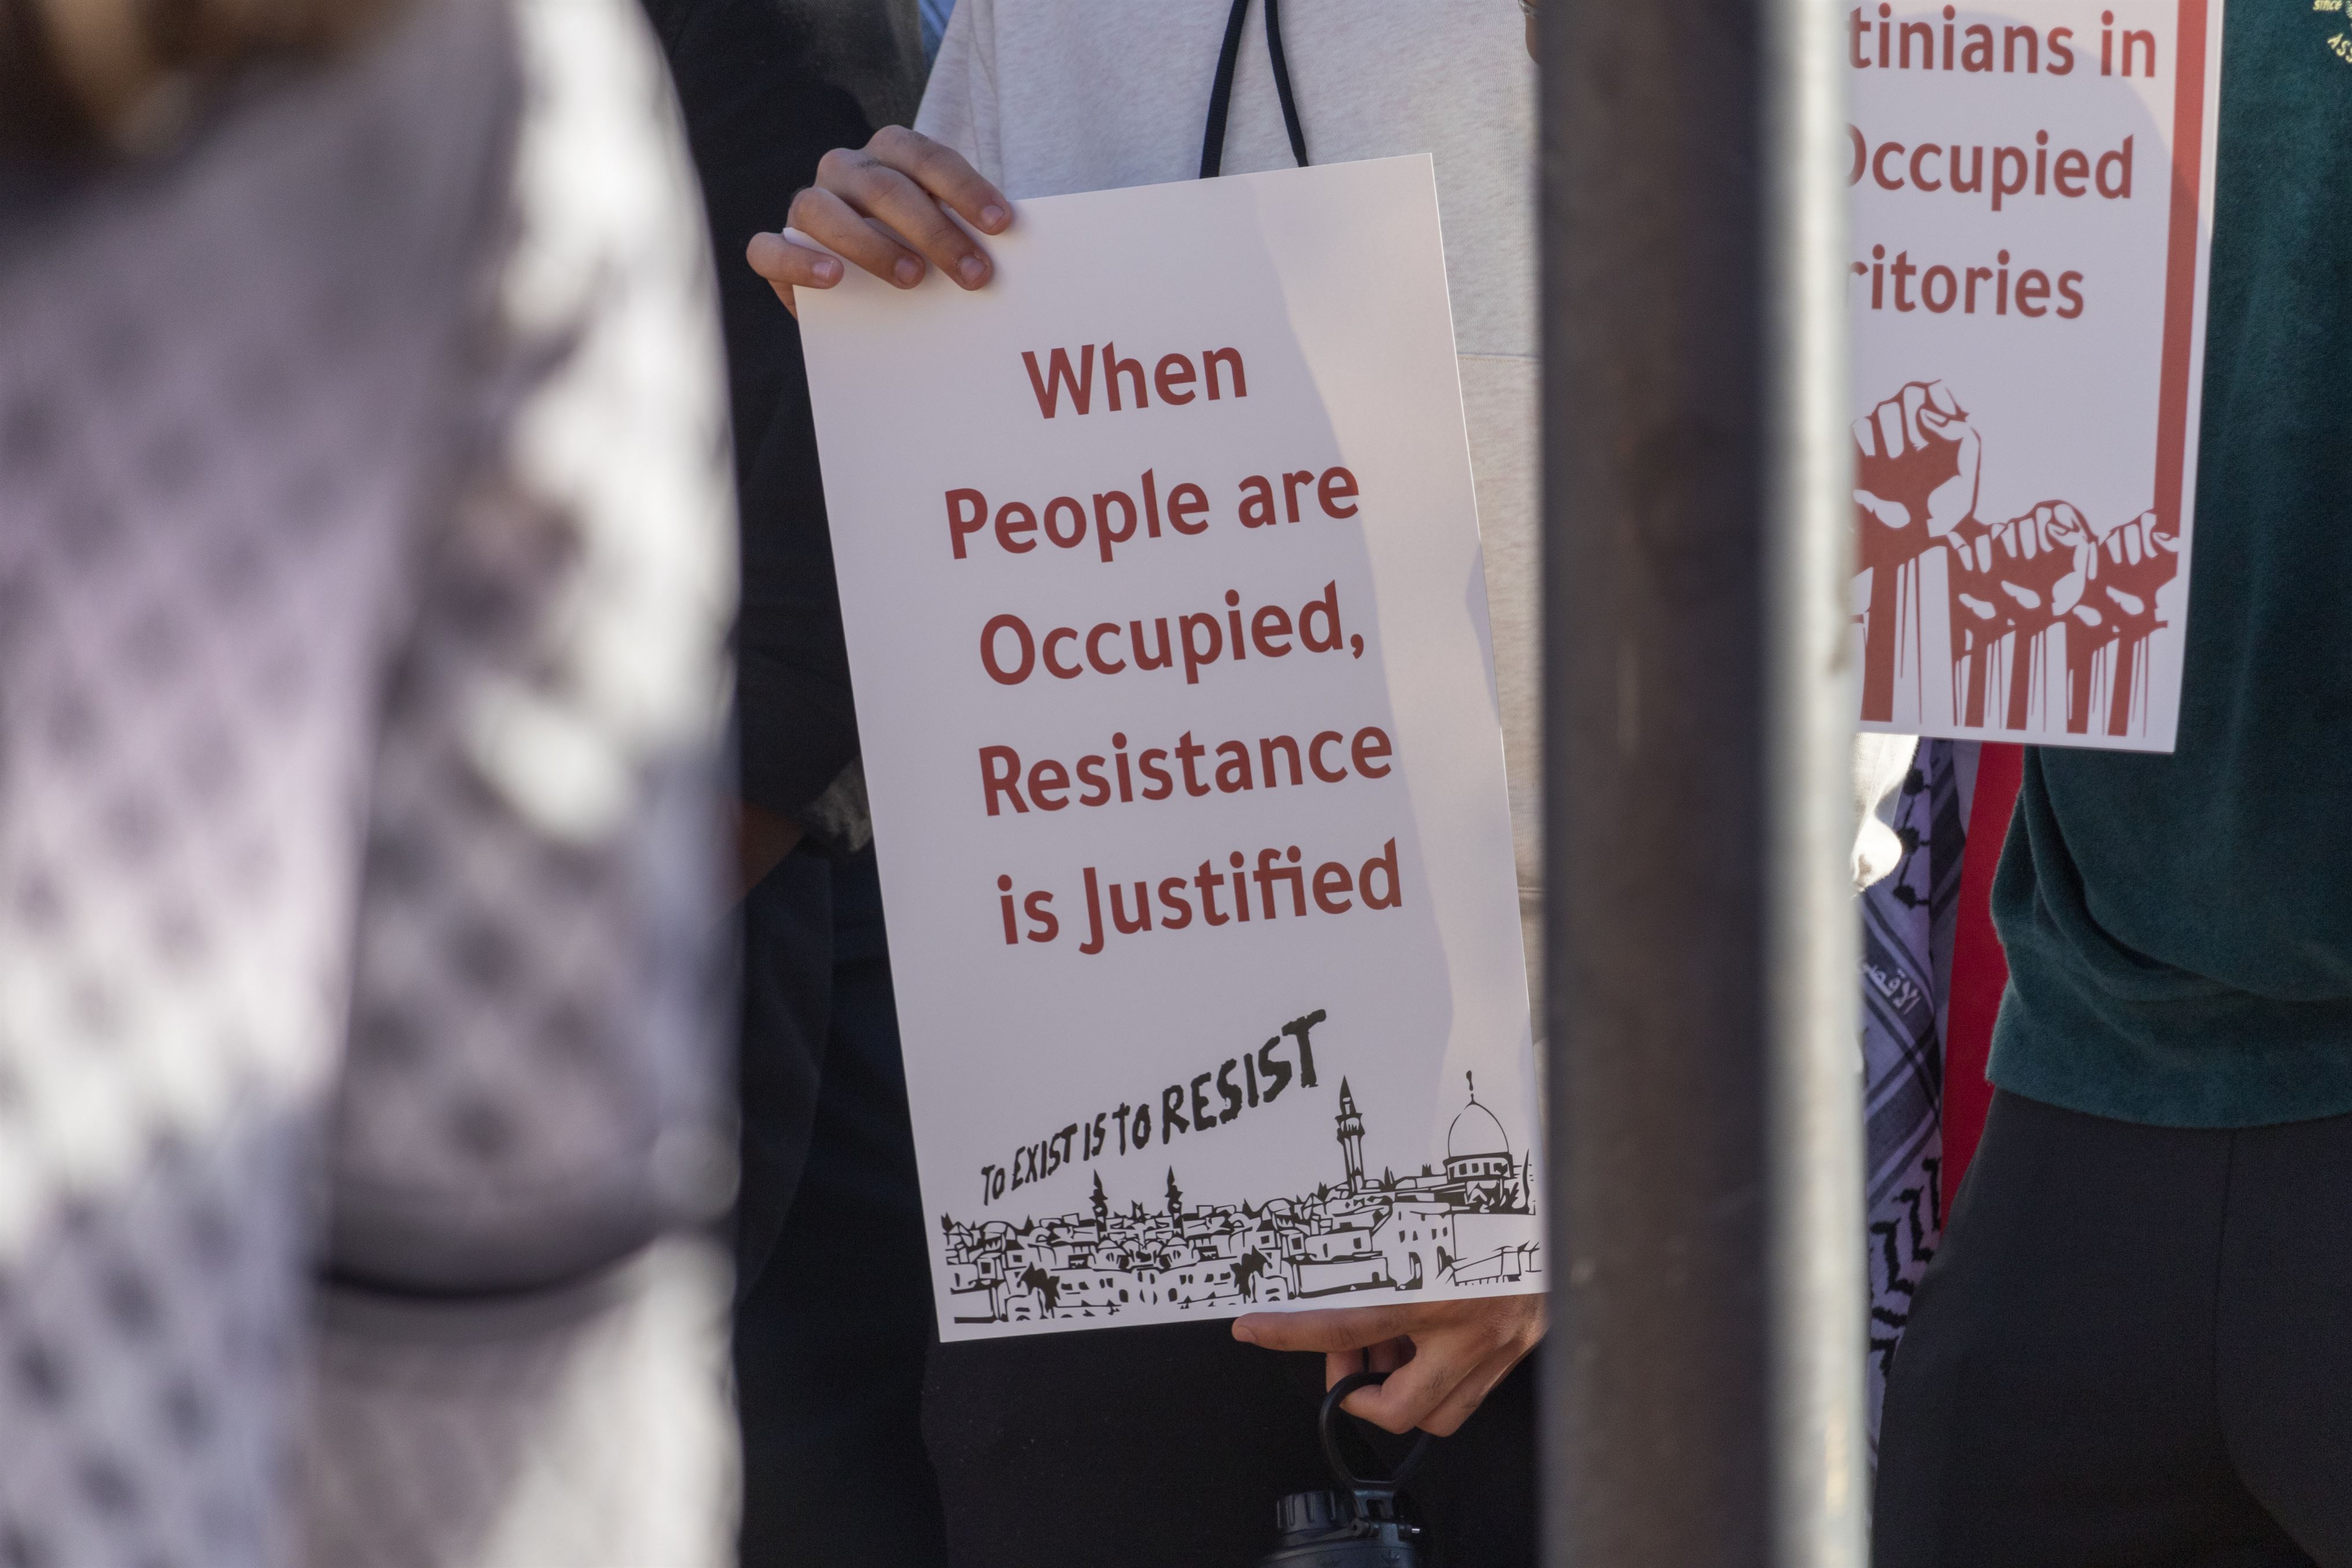 A sign reads "When People are Occupied, Resistance is Justified" at a pro-Palestine rally in the Student Center Quad.
Sal DiMaggio | The Montclarion